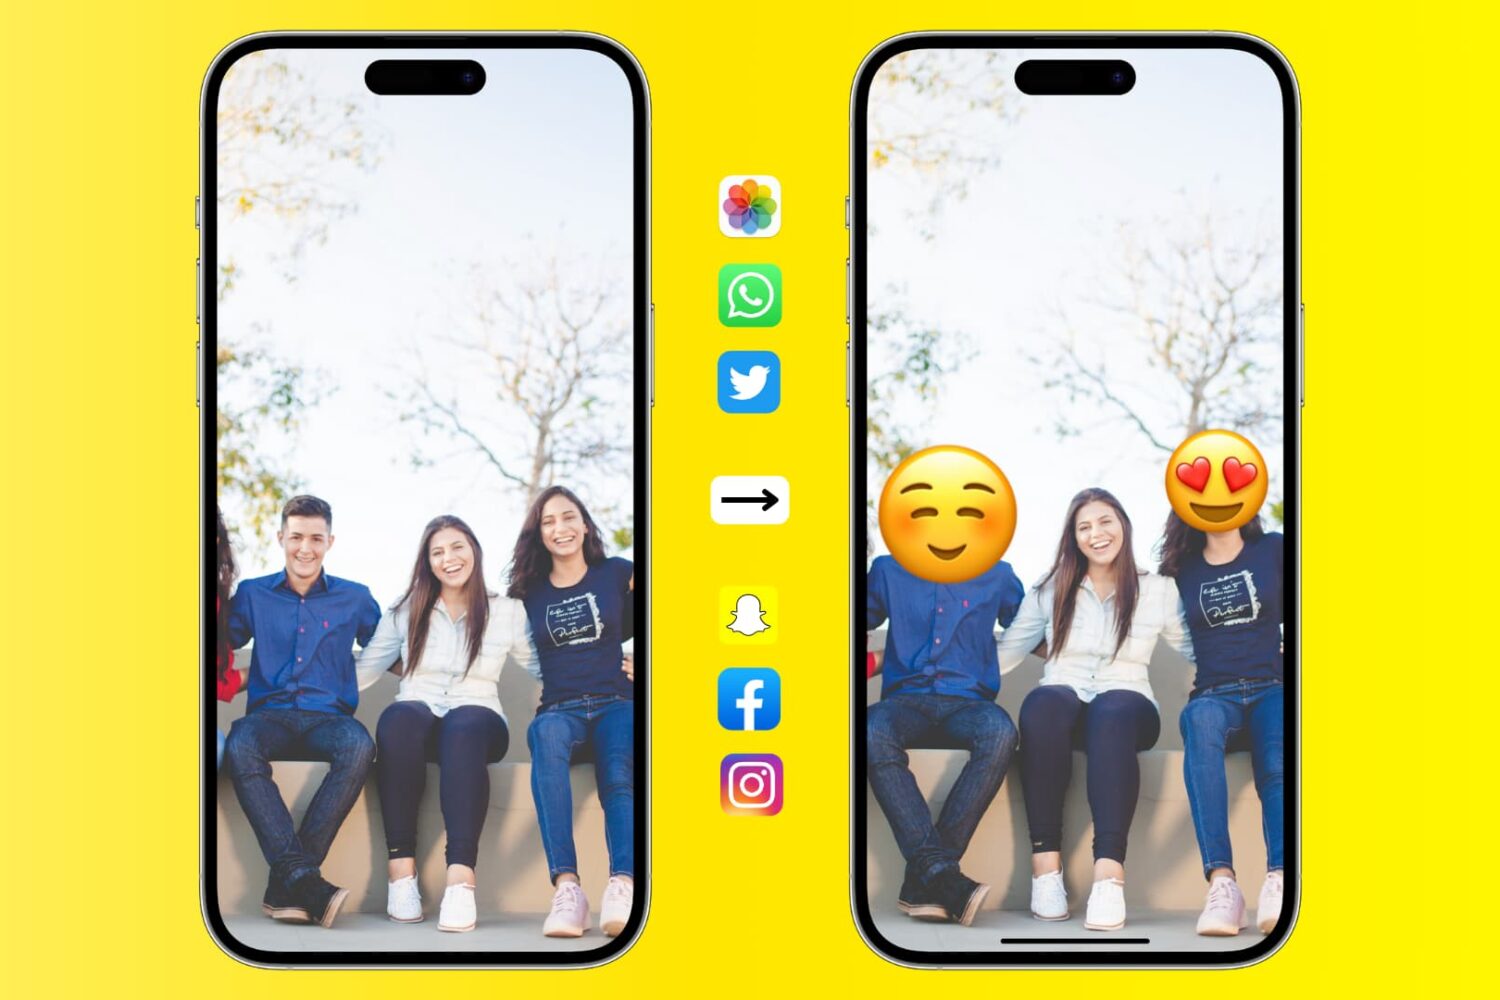 iPhone mockups showing emojis over faces of two people in a group photo